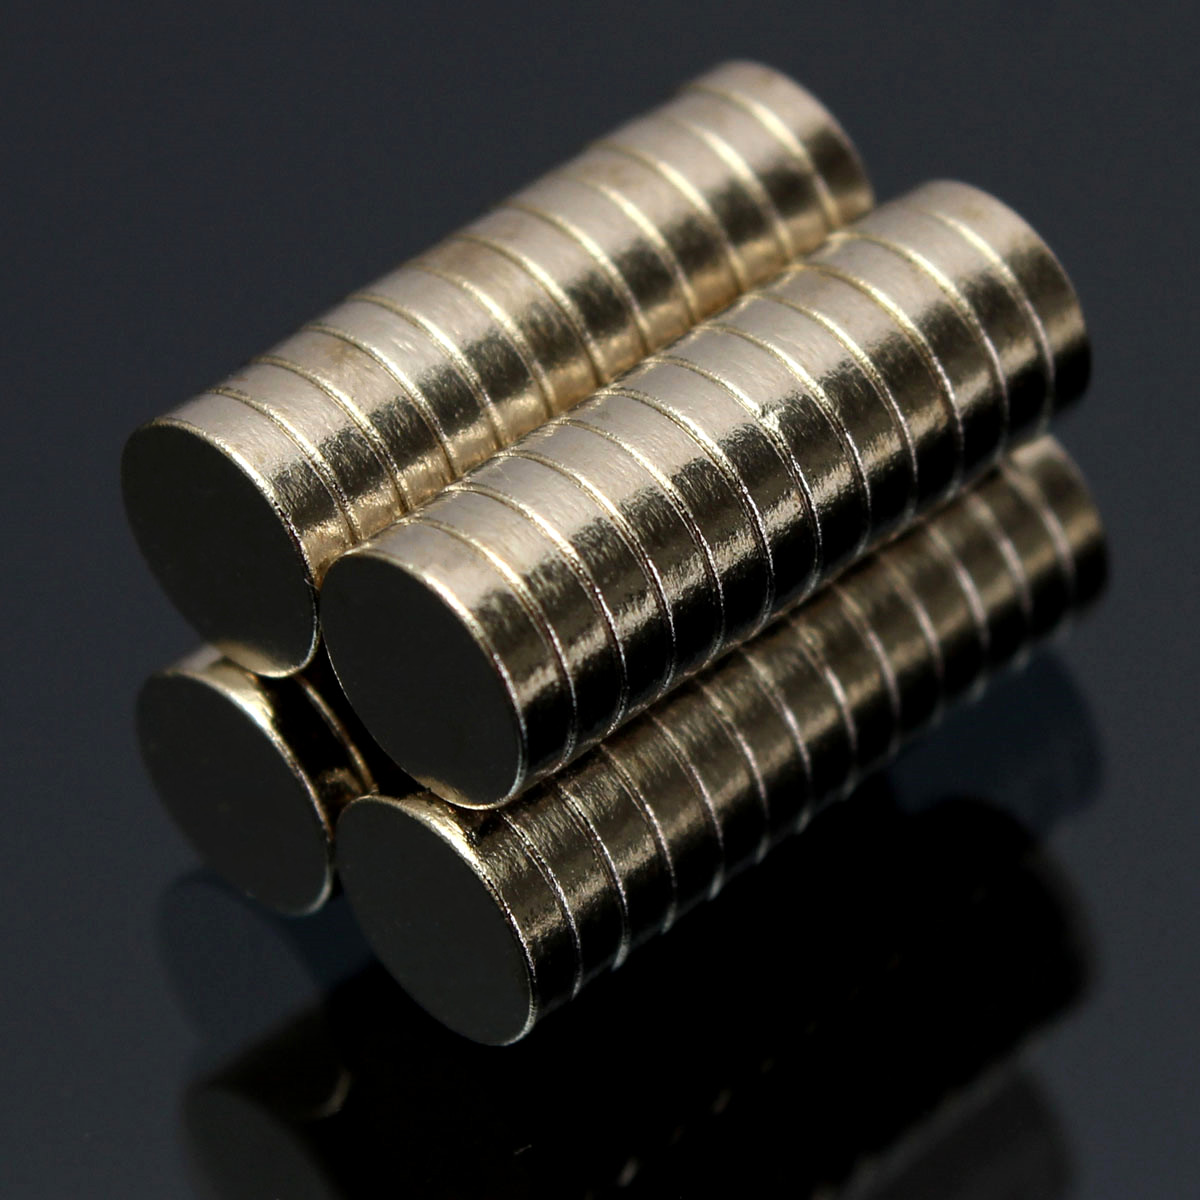 10pcs Strong Round Cylinder  Magnets 6 x 10mm Rare Earth Neodymium N35 